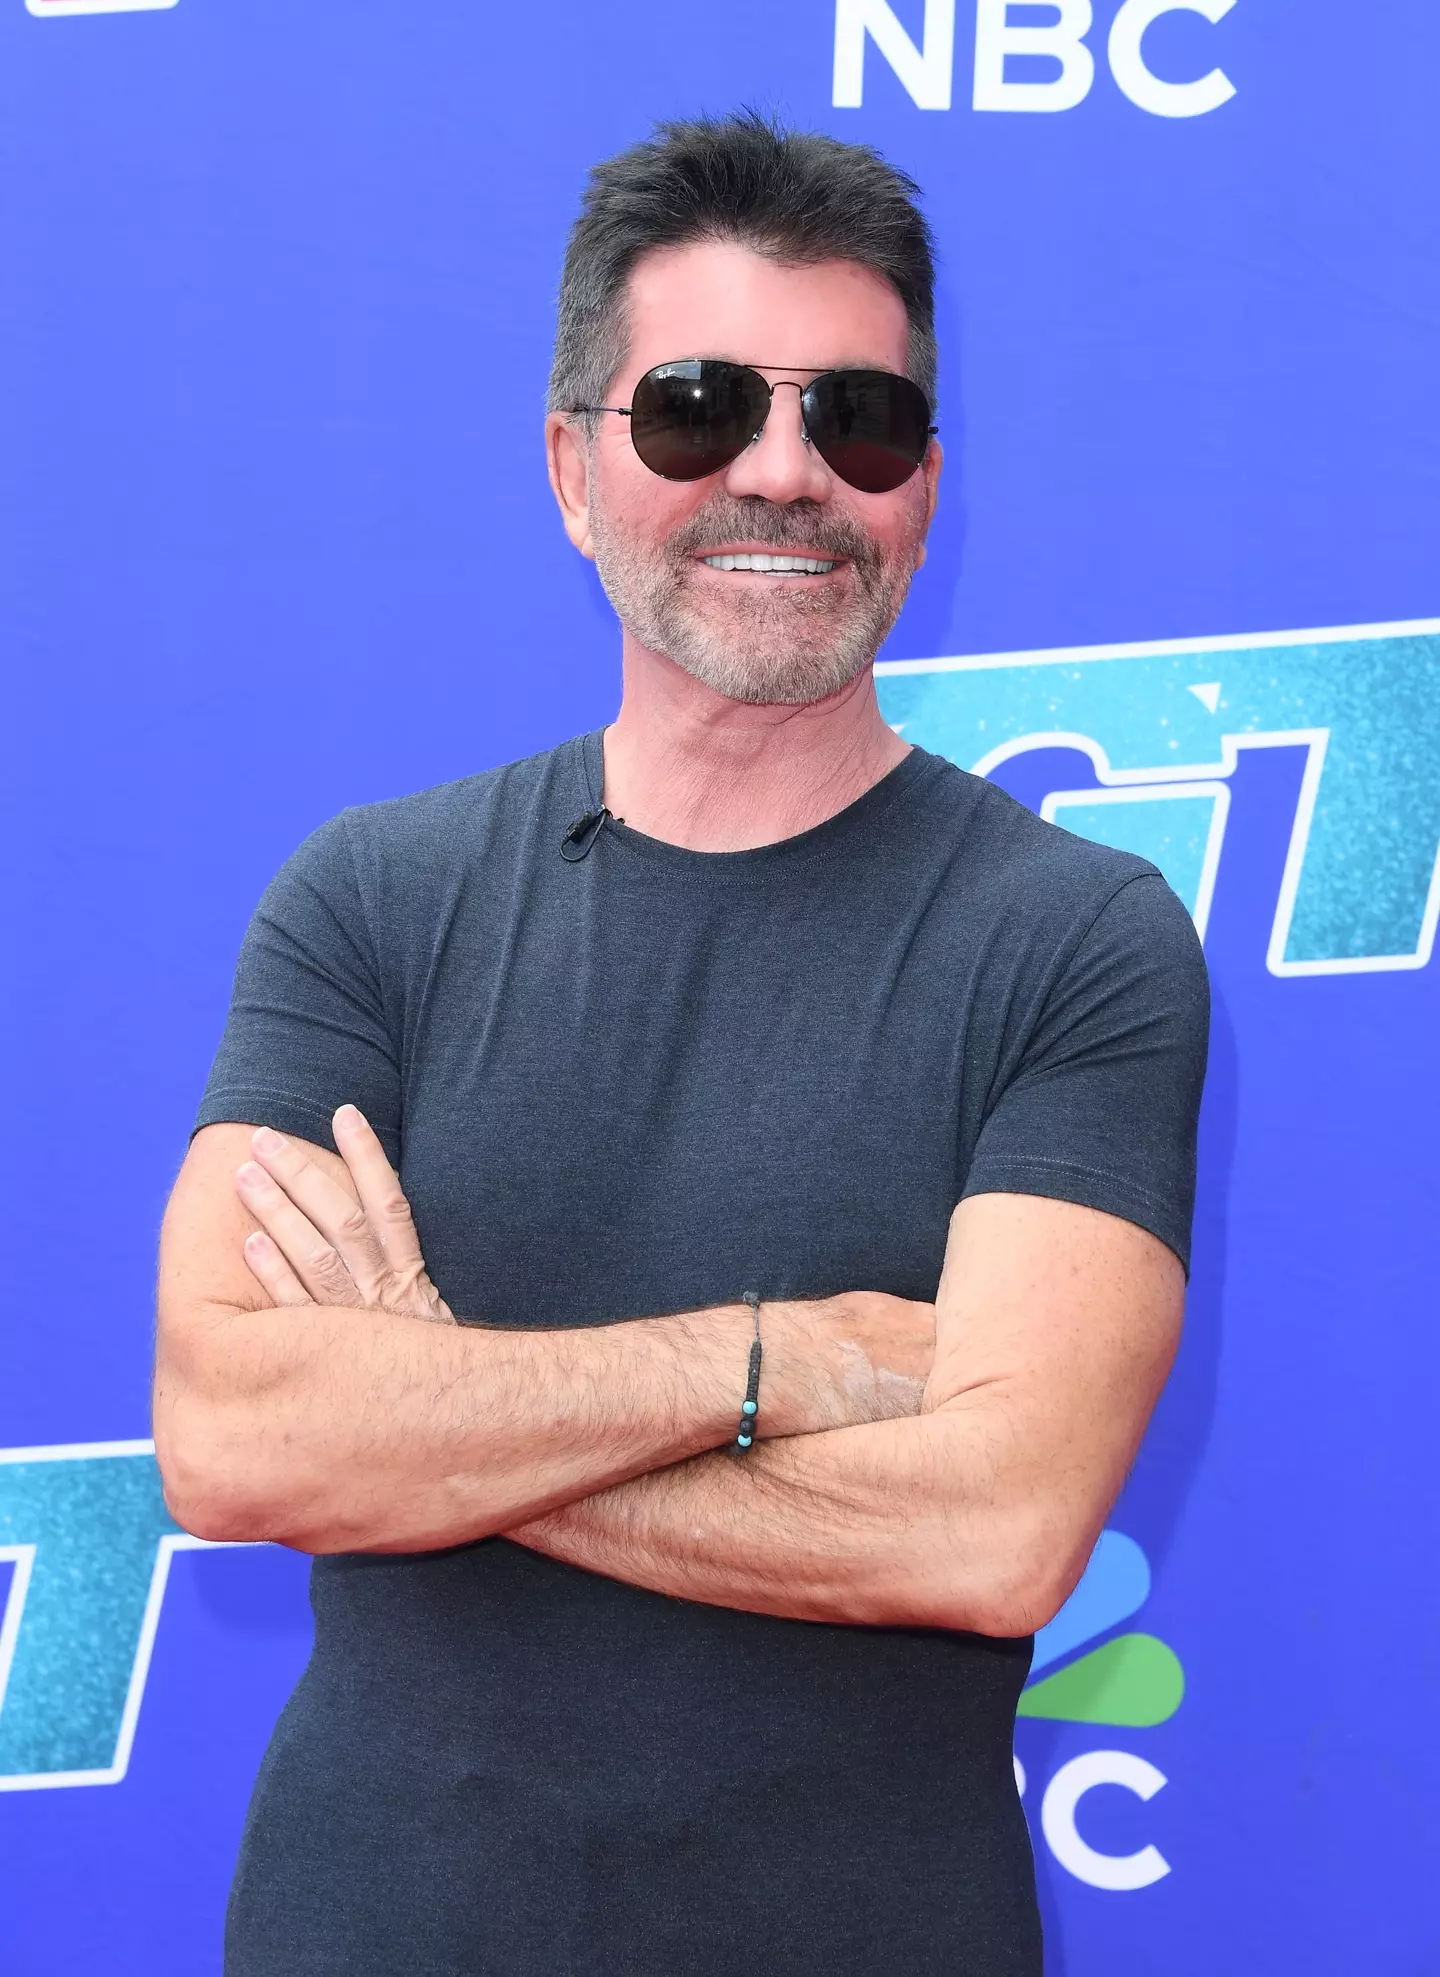 Simon Cowell 'couldn't care less' about the CBB comments. (Steve Granitz/FilmMagic)